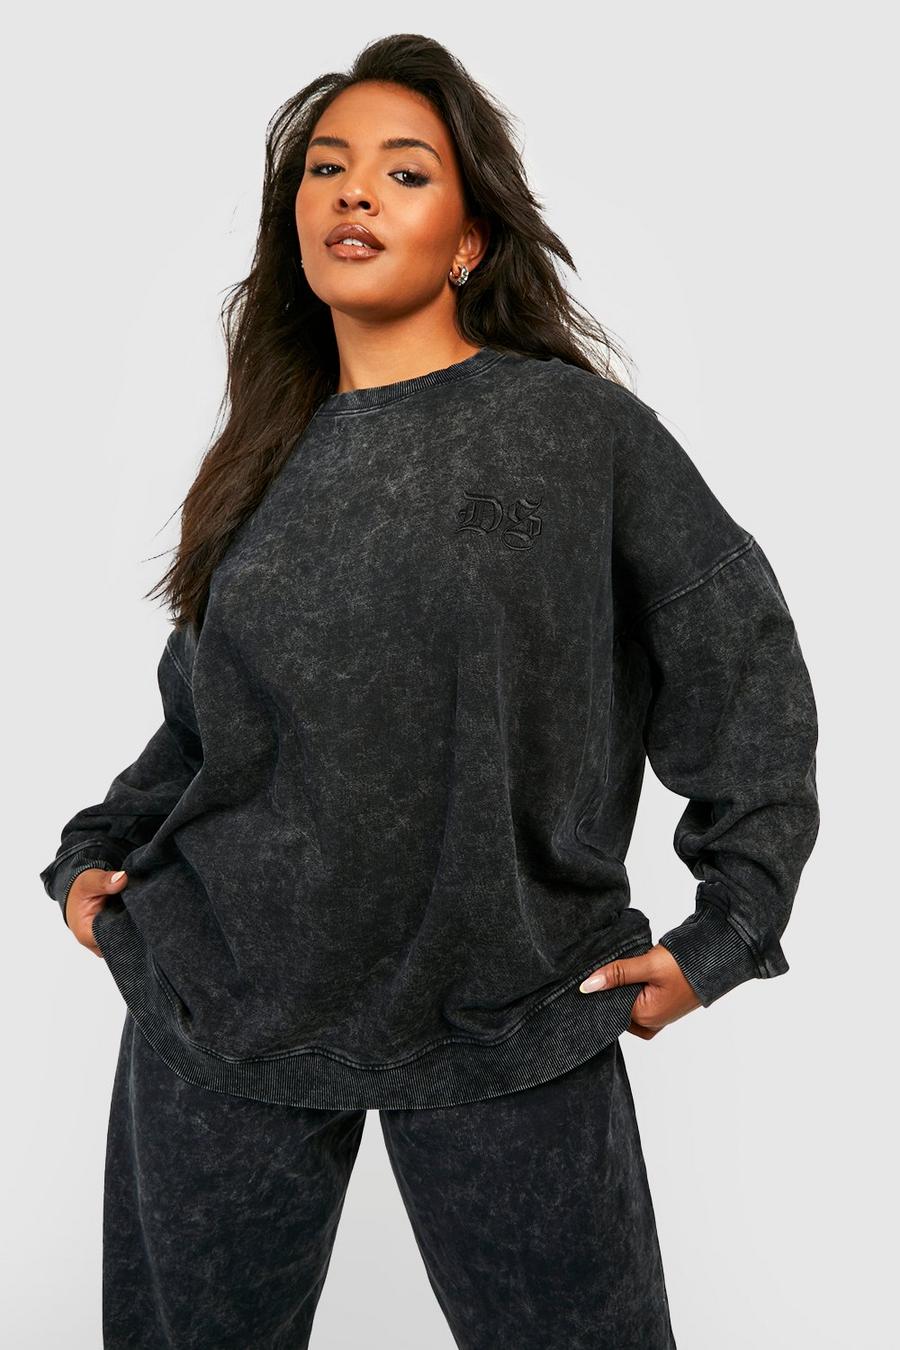 Charcoal grey Plus Acid Wash Embroidered Oversized Sweater